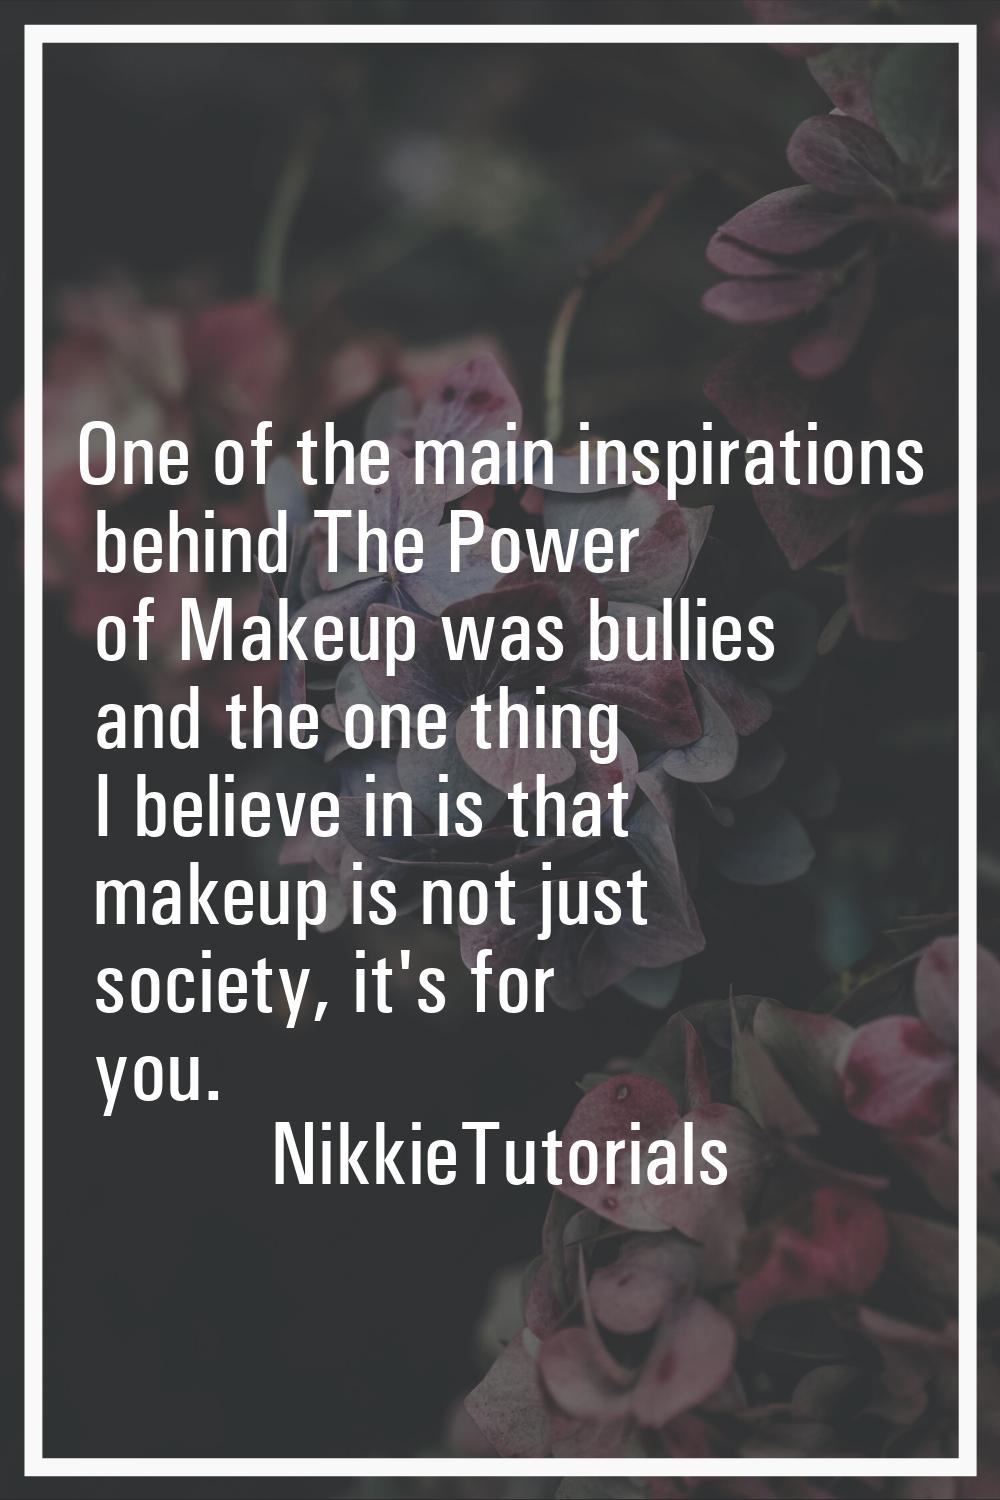 One of the main inspirations behind The Power of Makeup was bullies and the one thing I believe in 